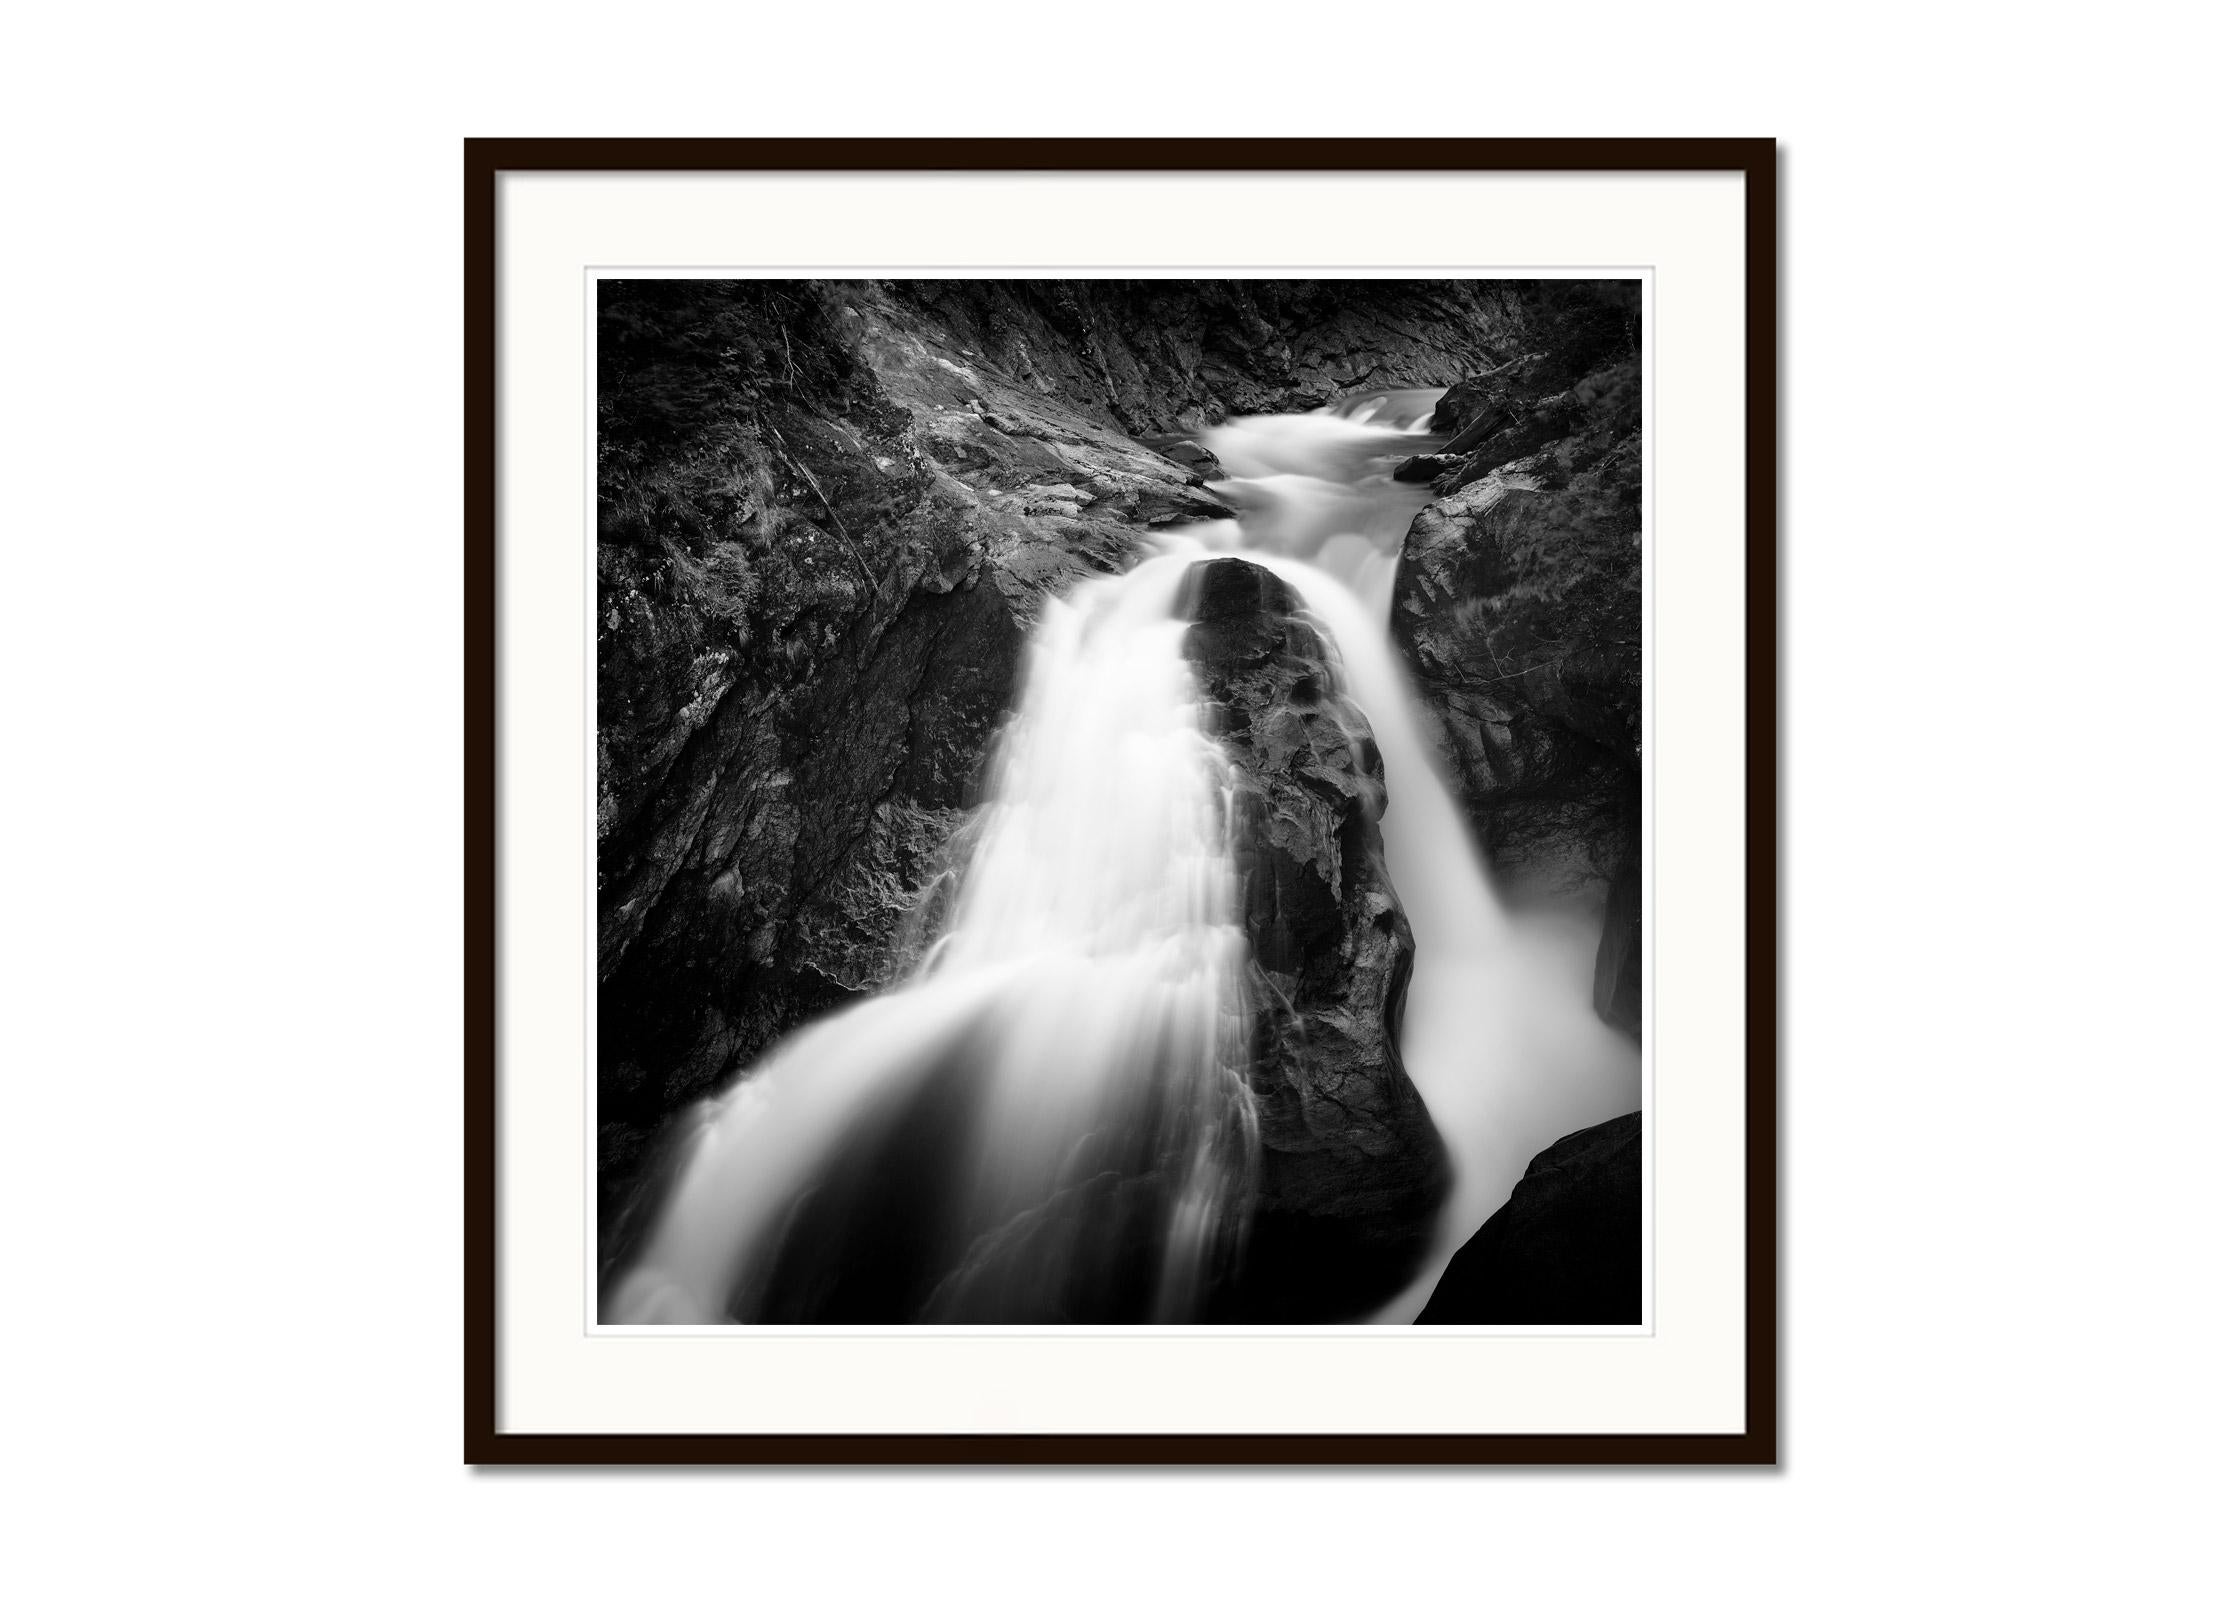 Krimmler Ache, waterfall, mountain river, black and white photography, landscape - Contemporary Photograph by Gerald Berghammer